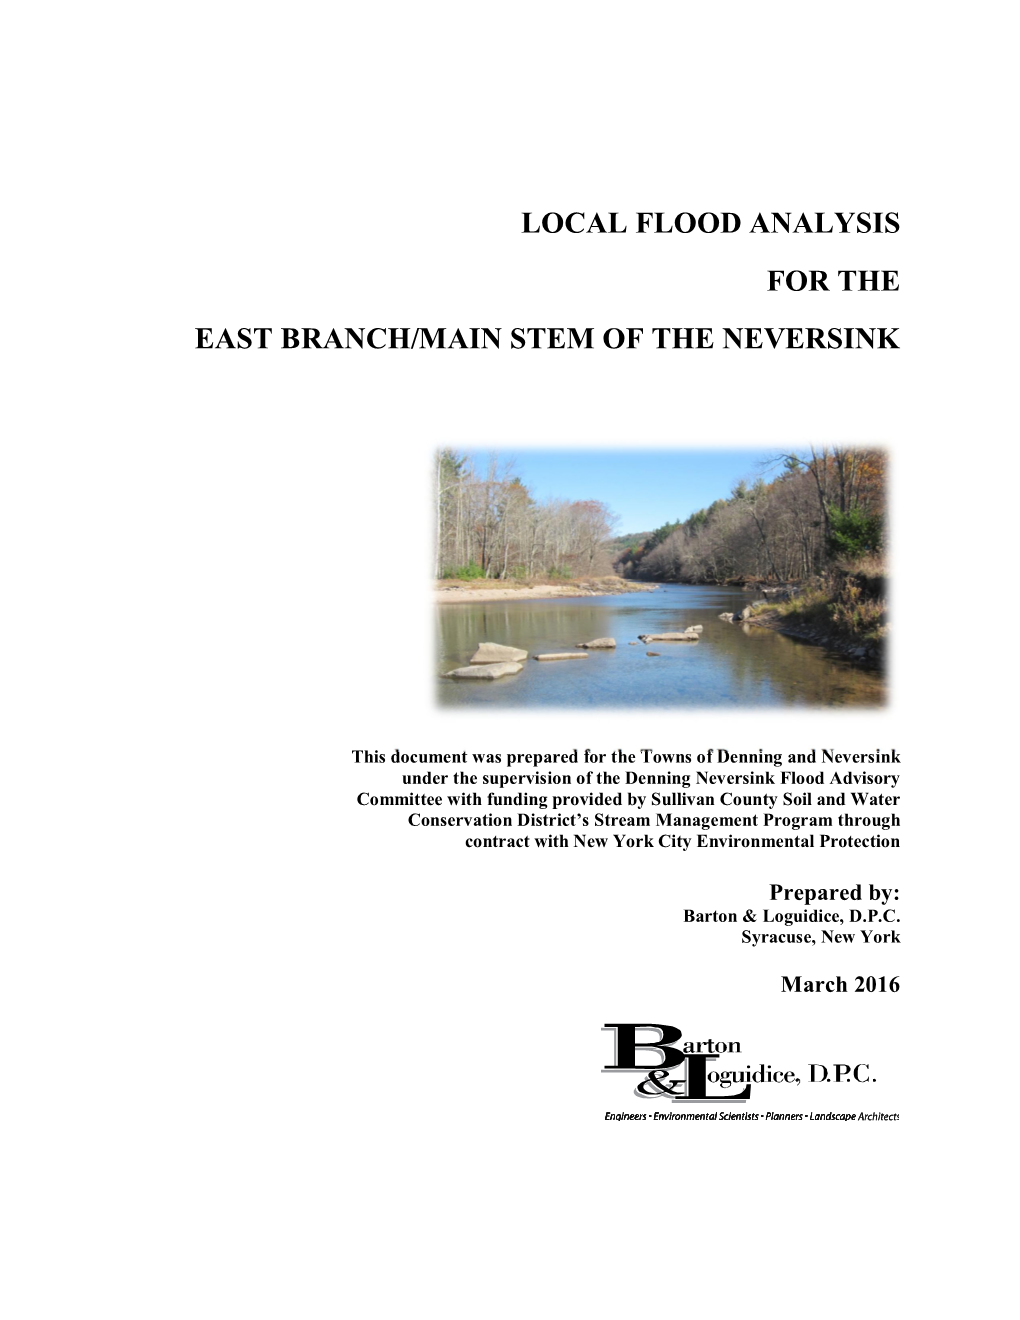 Local Flood Analysis for the East Branch/Main Stem of the Neversink